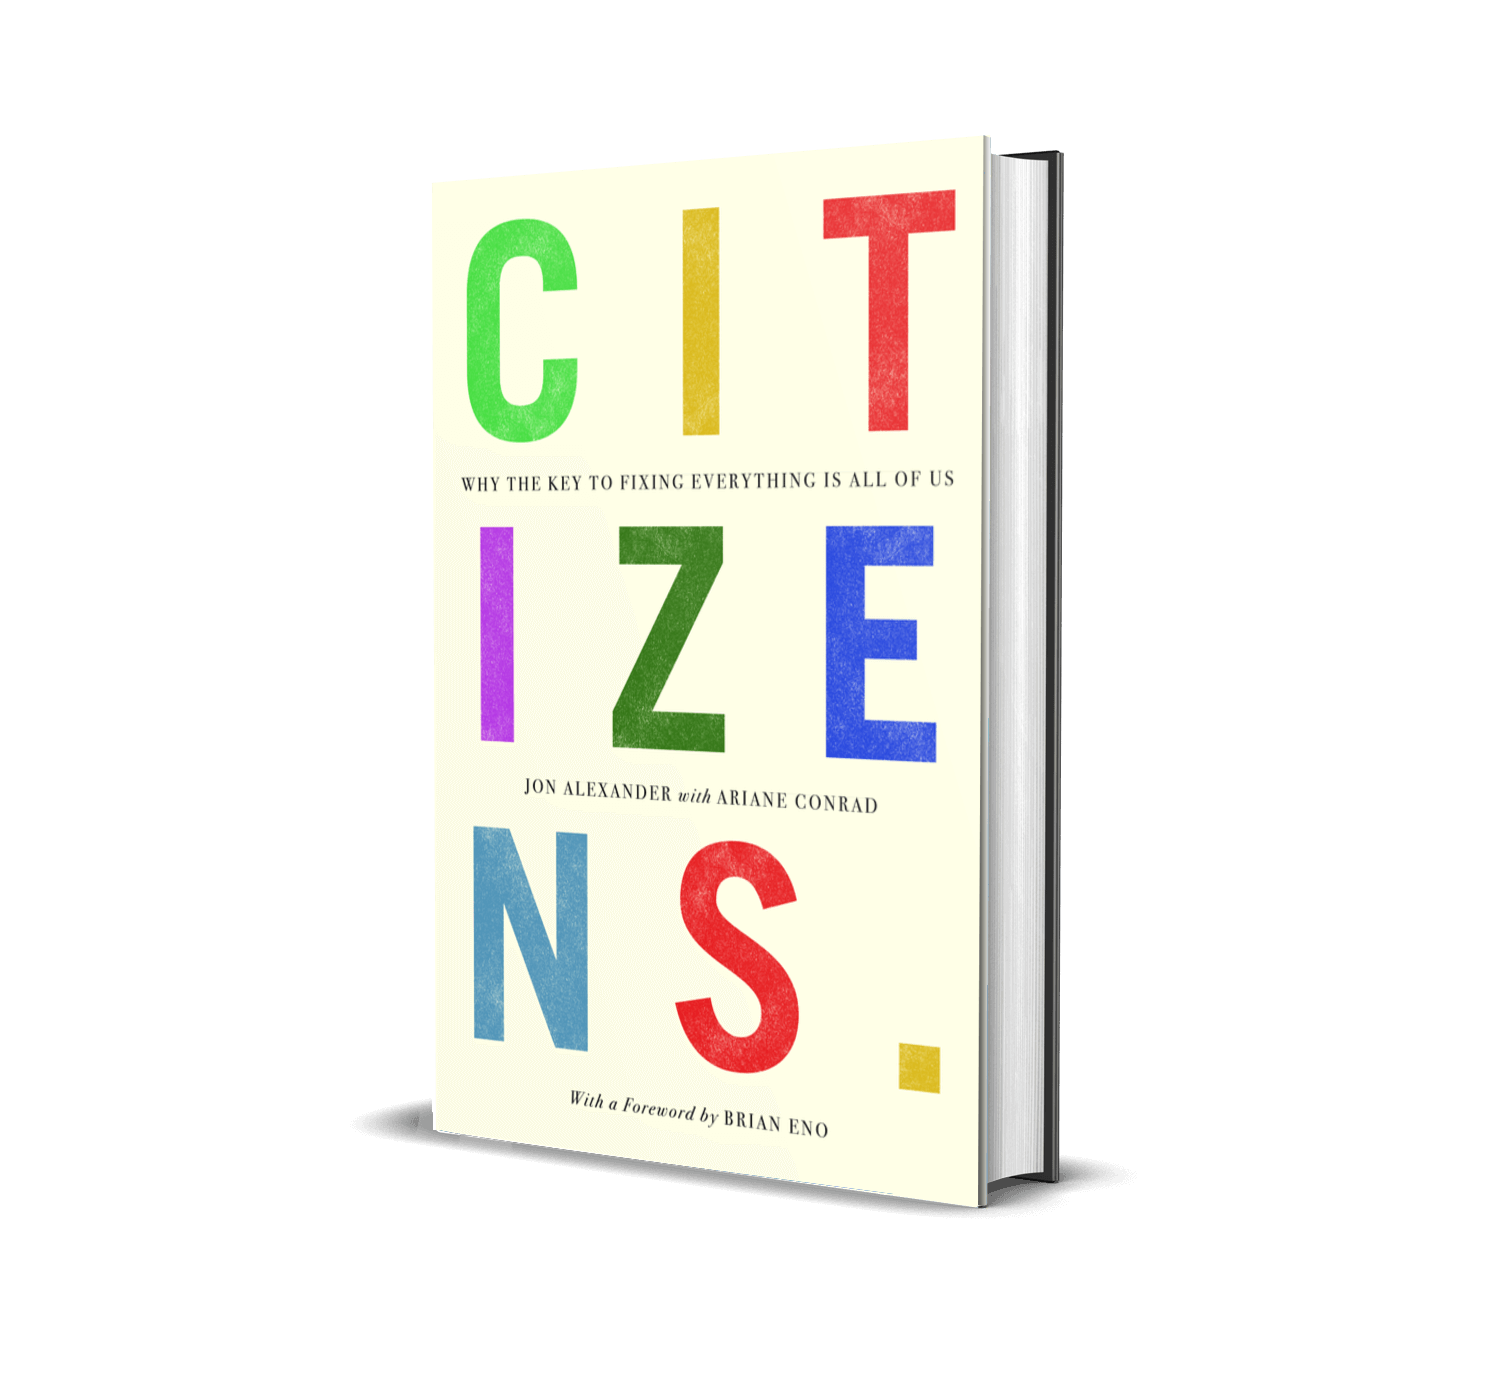 Book cover - Citizens: Why the Key to Fixing Everything is All of Us.